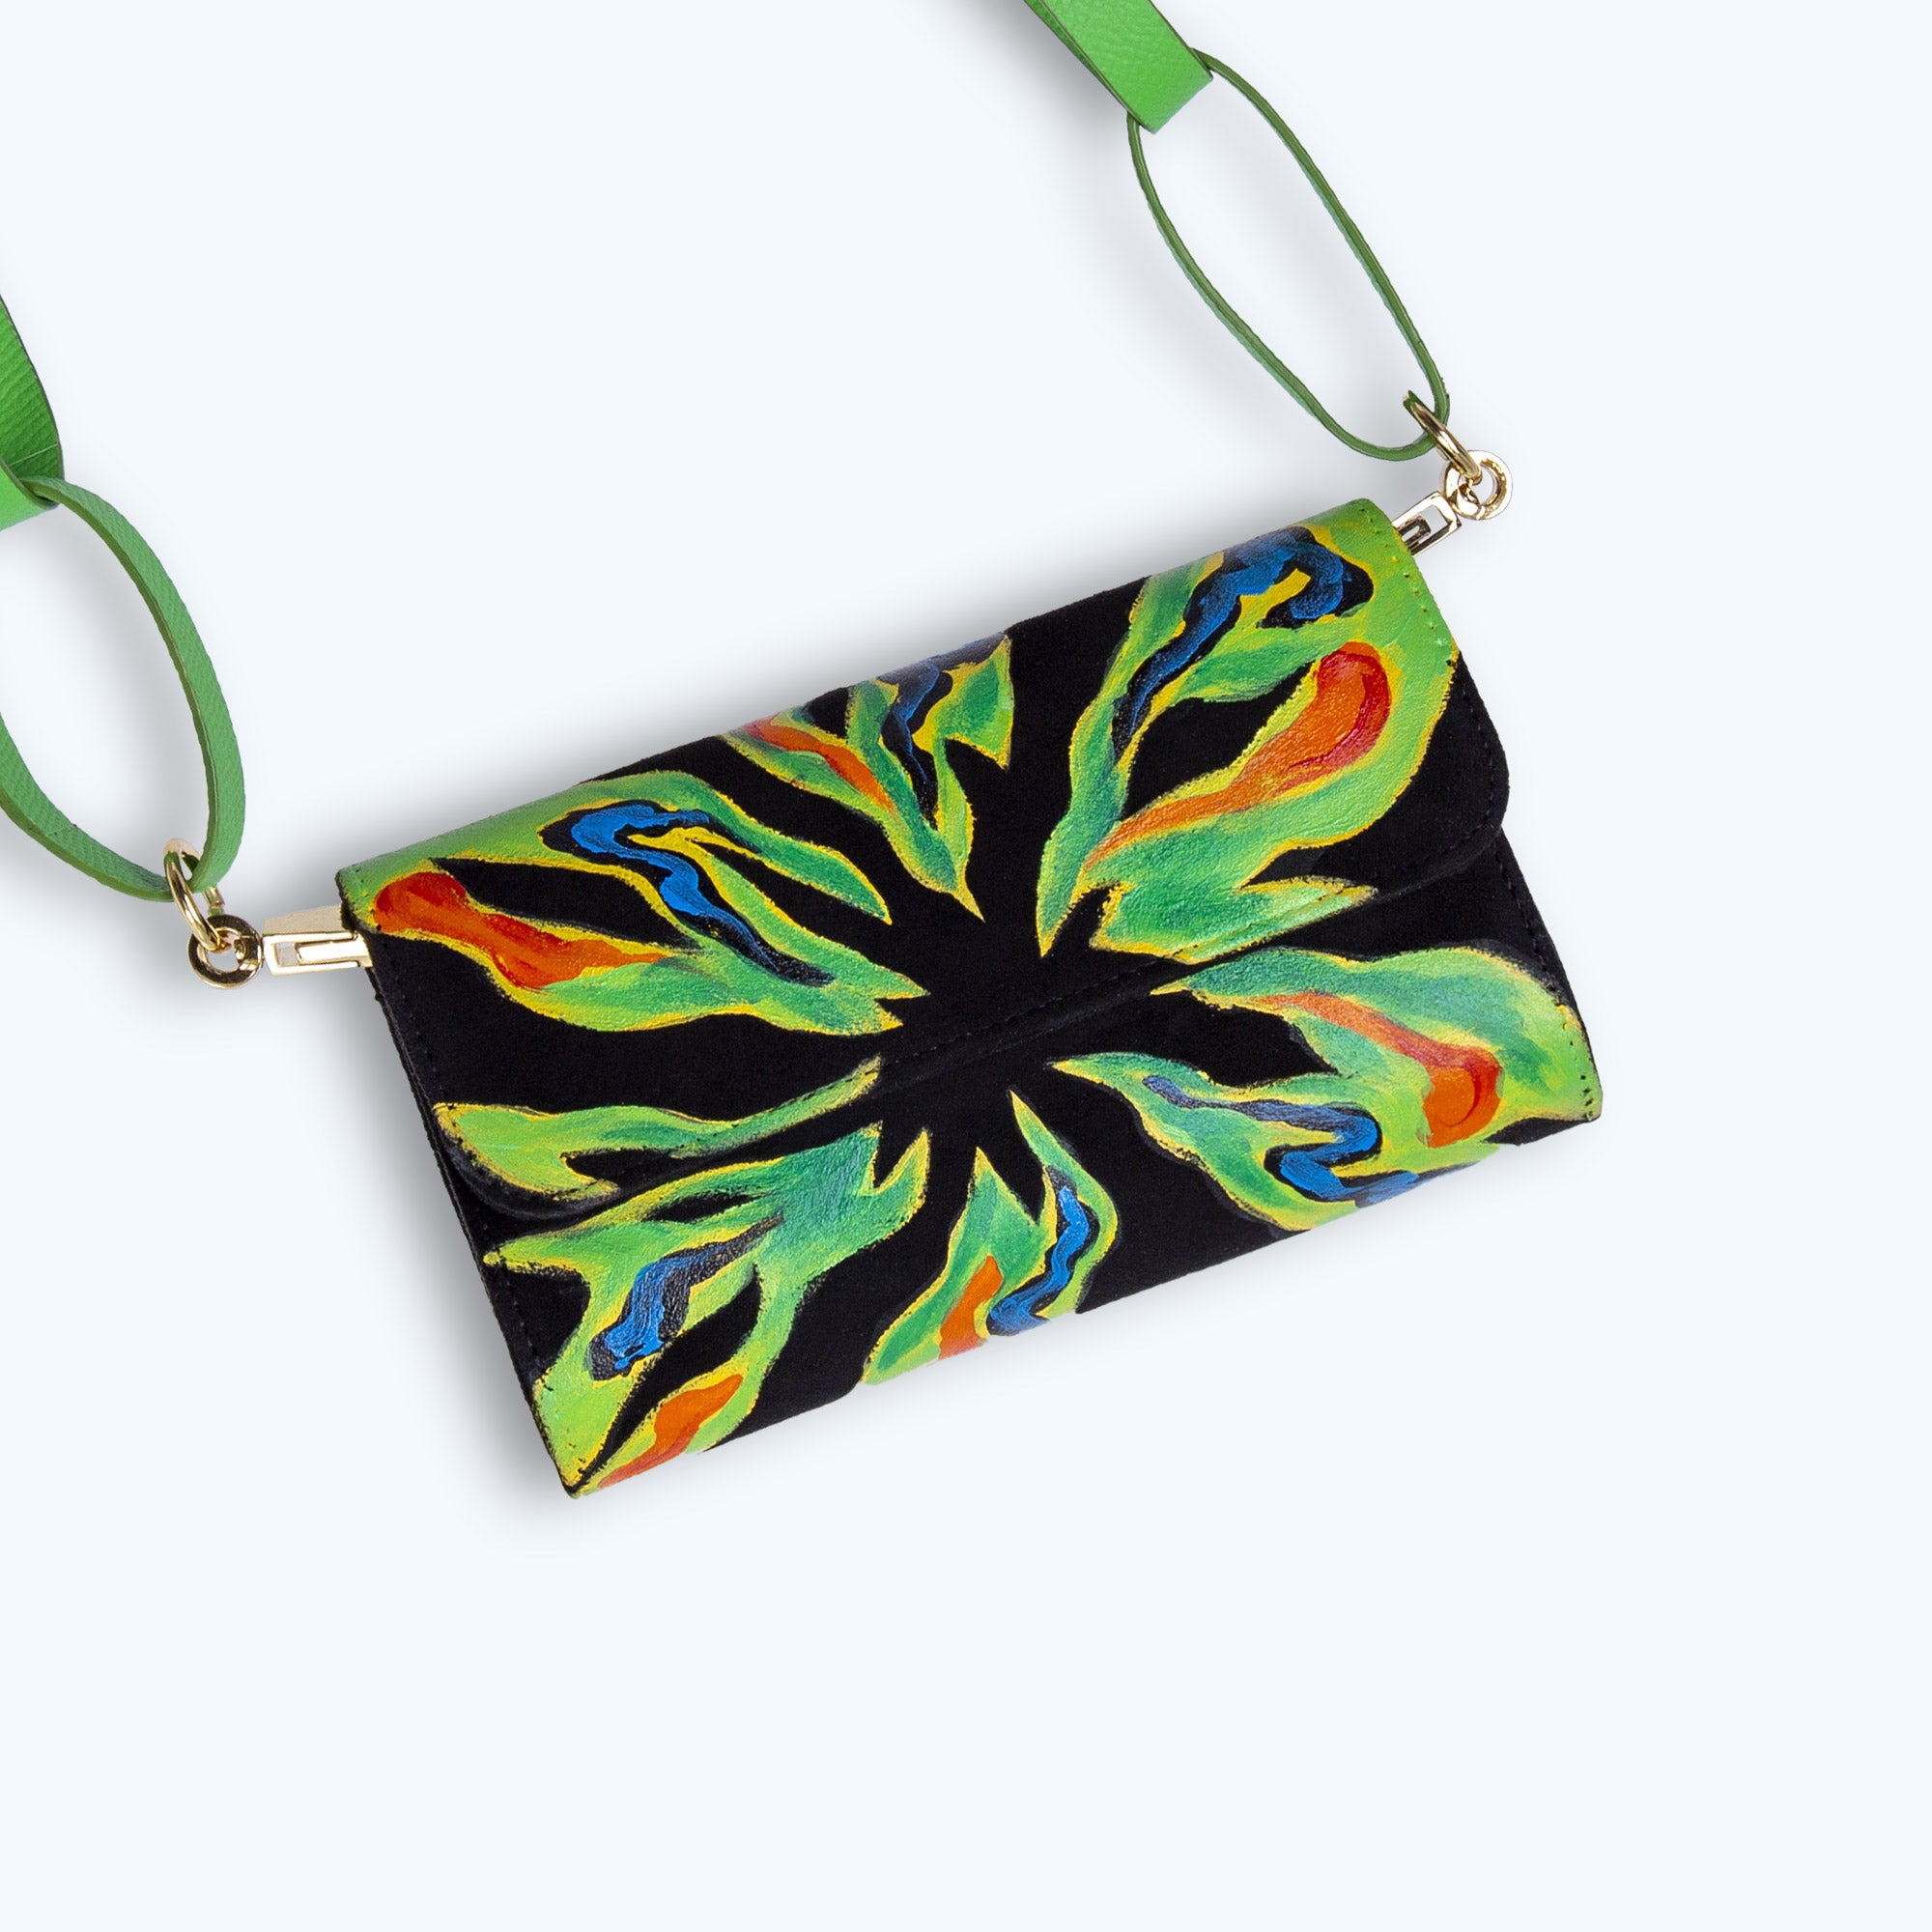 Leather Bag - Hand Painted - Hippie Daily Artisanals